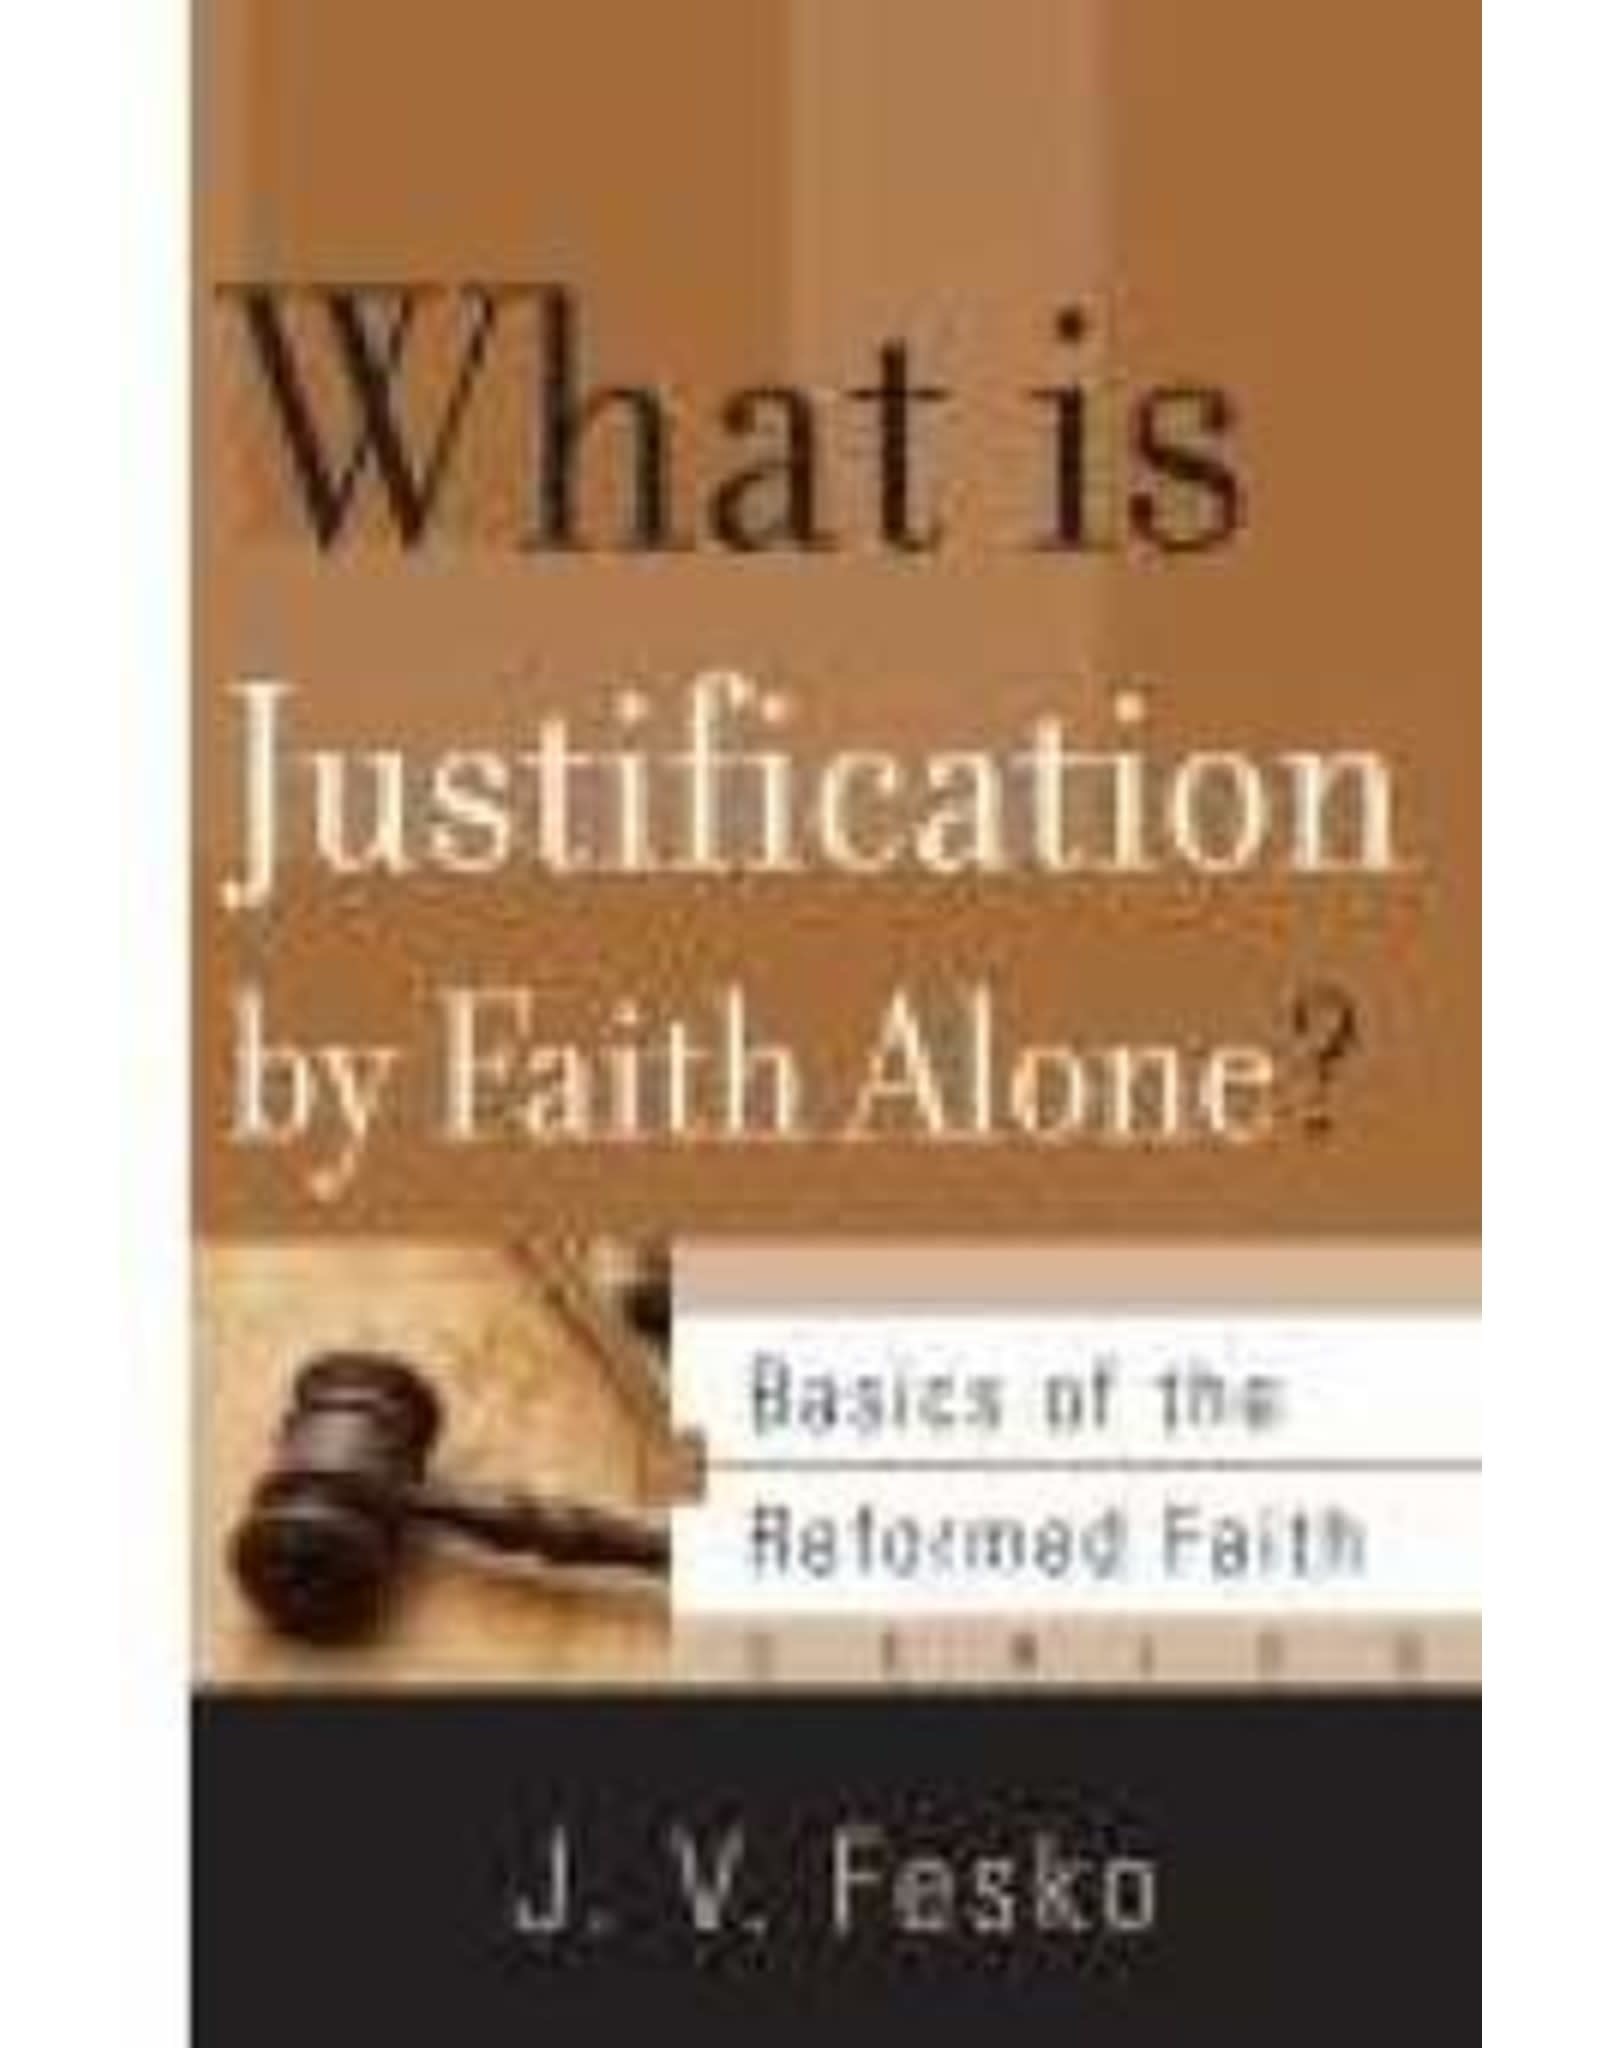 Fesco What is Justification by Faith Alone?